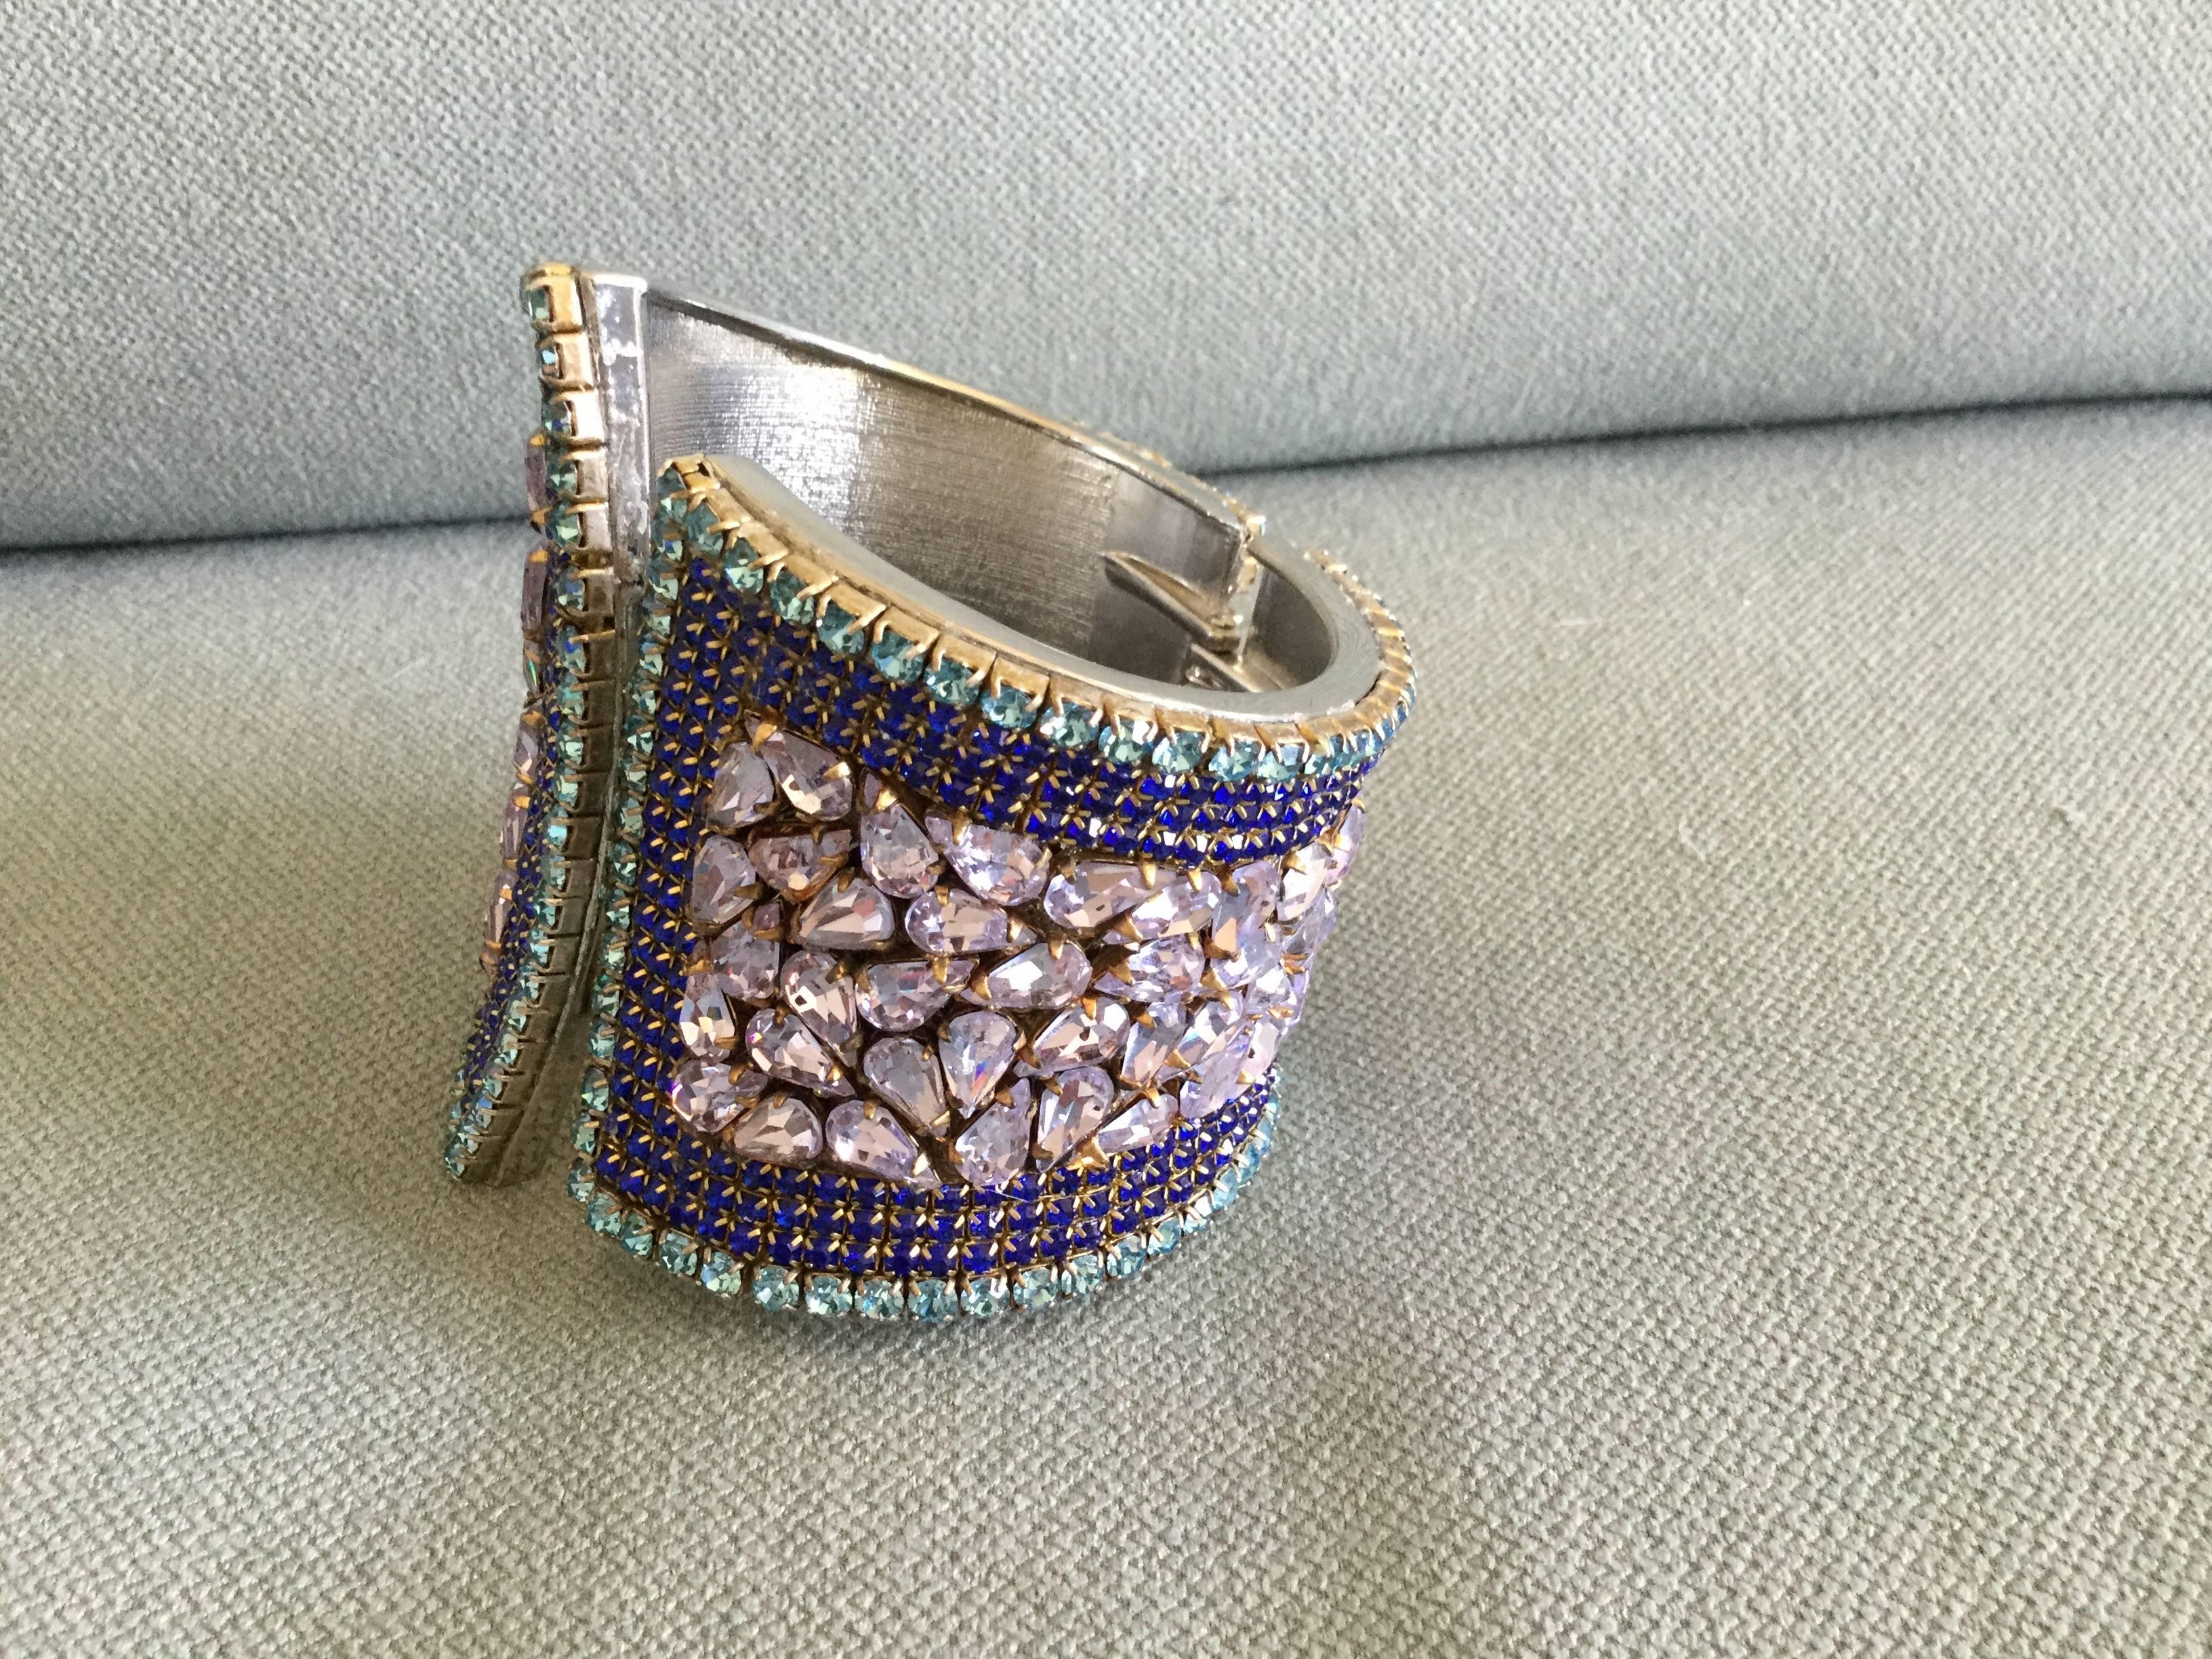 Show stopping clamper style cuff bracelet.  Interesting asymmetrical design. Highly original color palette of gorgeous aquamarine, sapphire, and pale lavender crystal pastes set in silver toned metal.  All pastes are hand set. This piece really